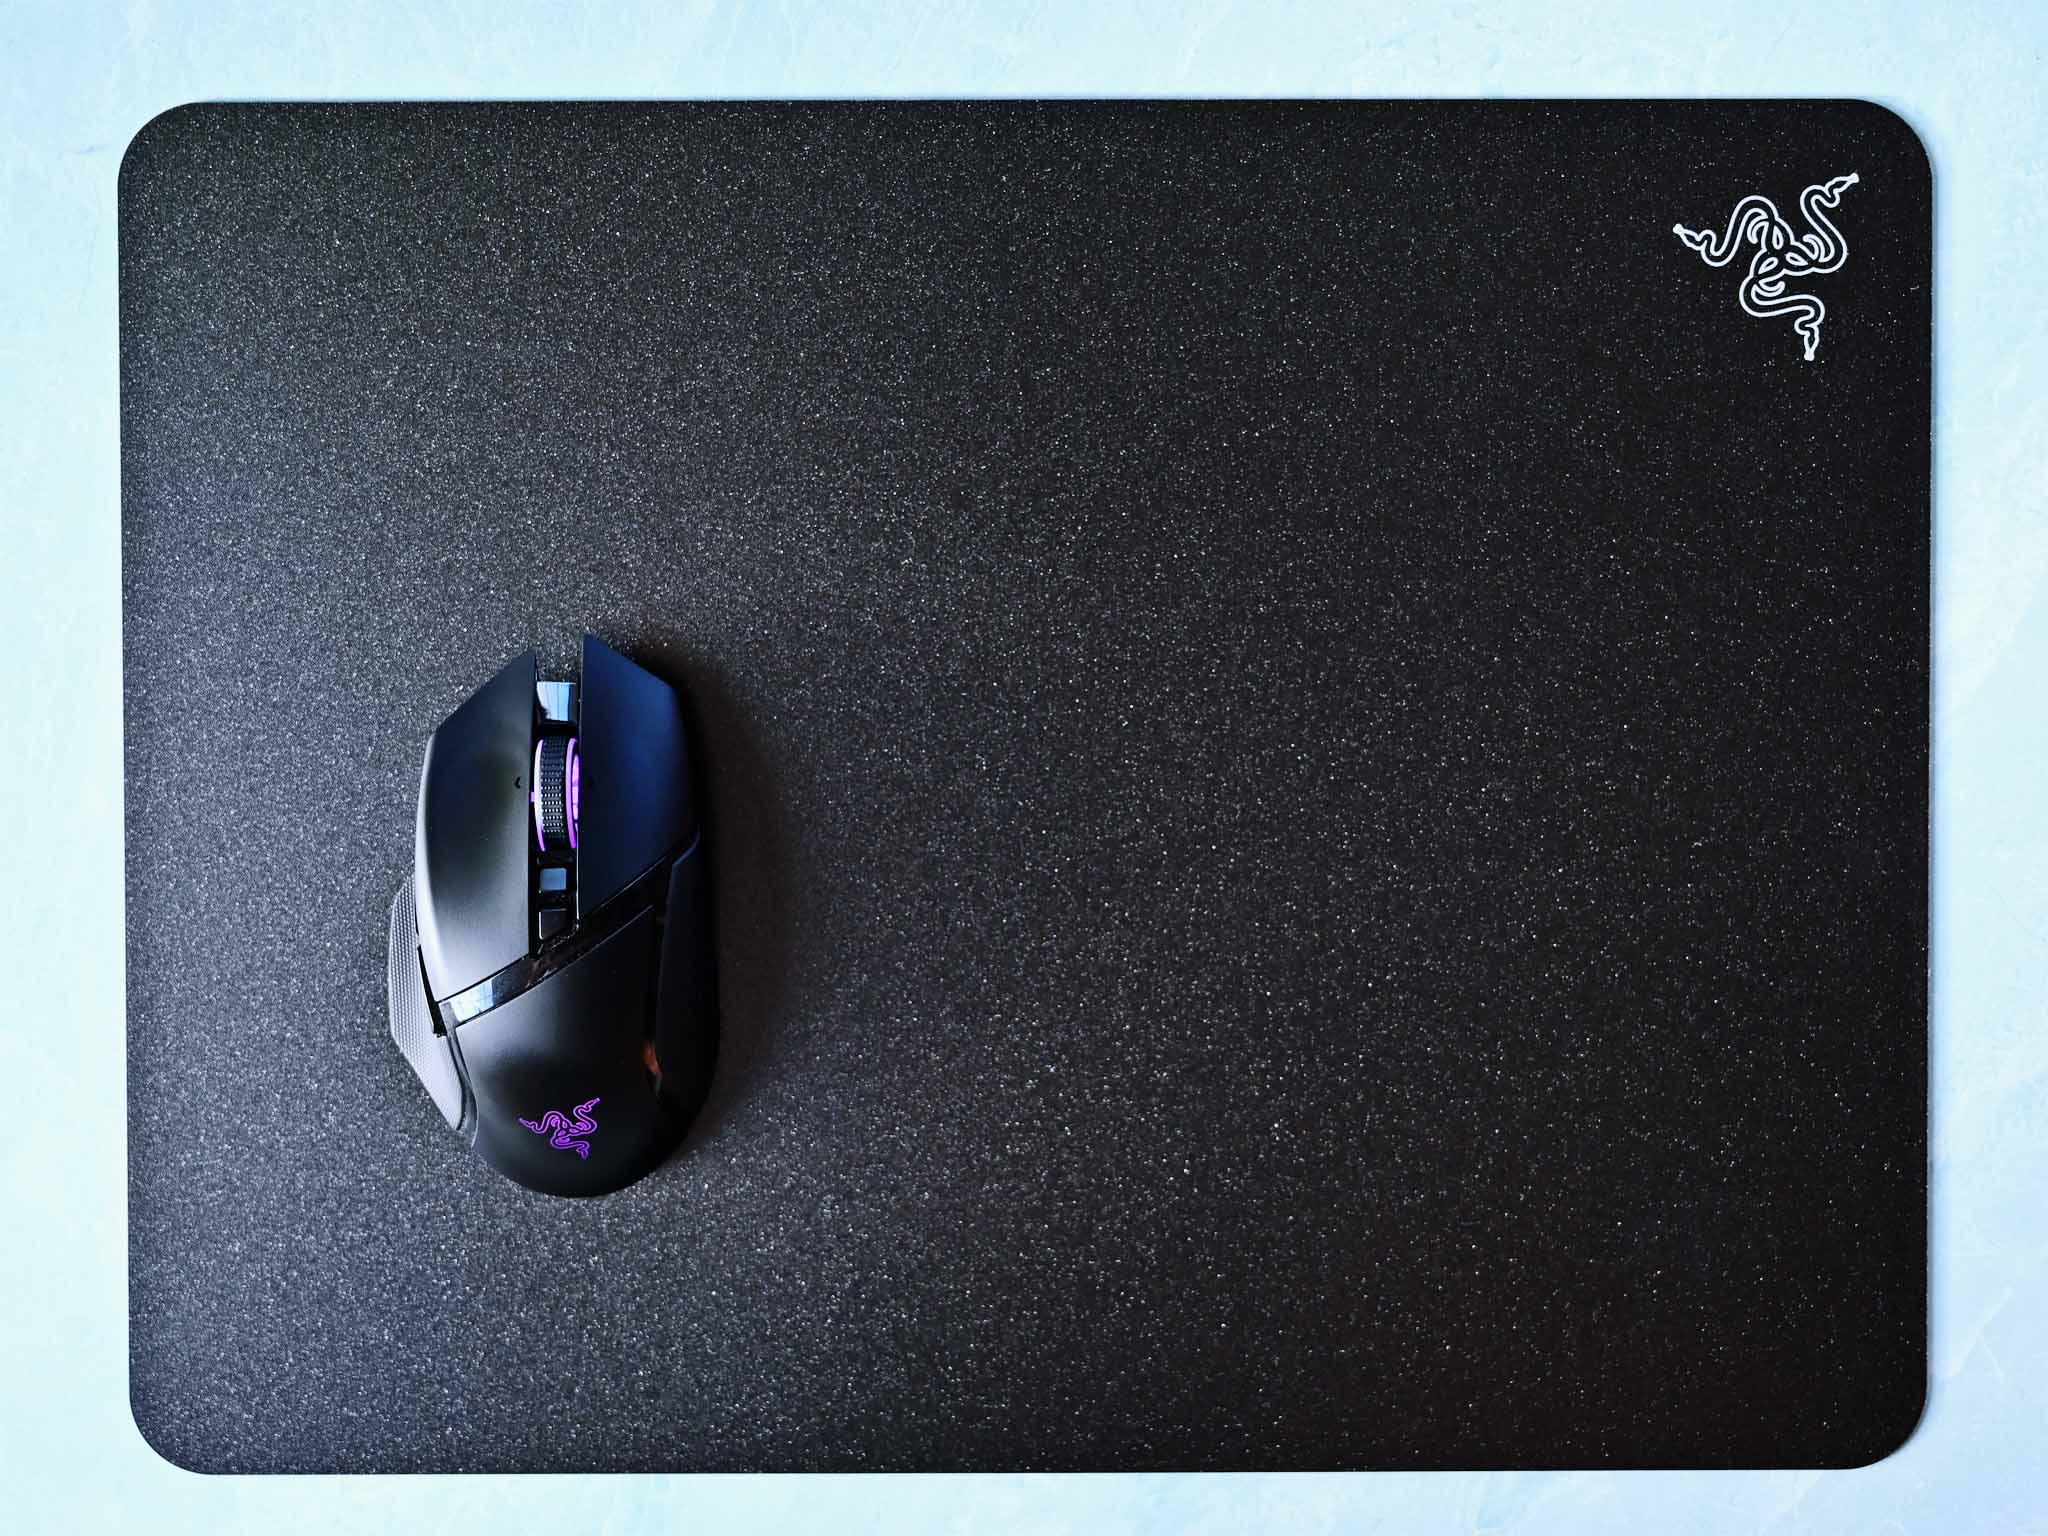 Razer Acari is a super slick, low-friction mouse mat for high 